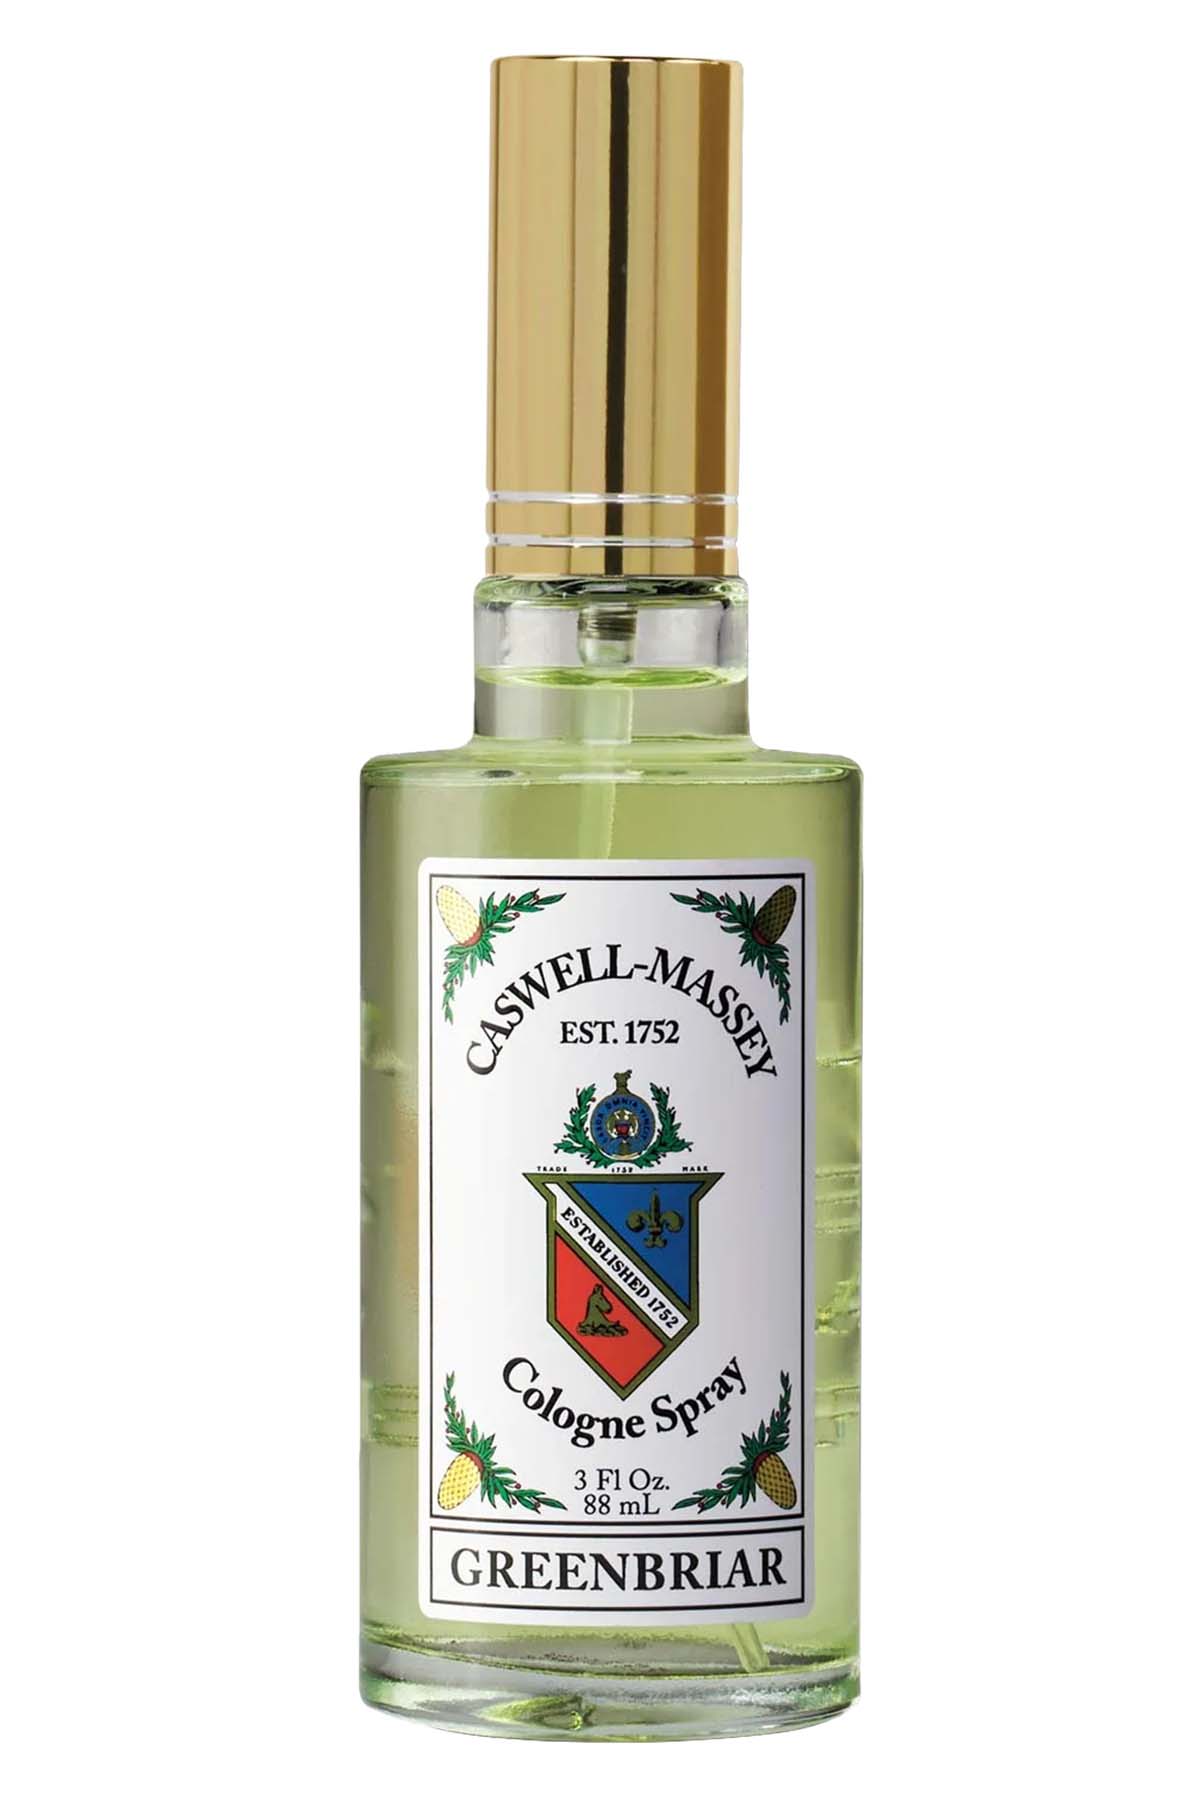 Caswell Massey Greenbriar Cologne